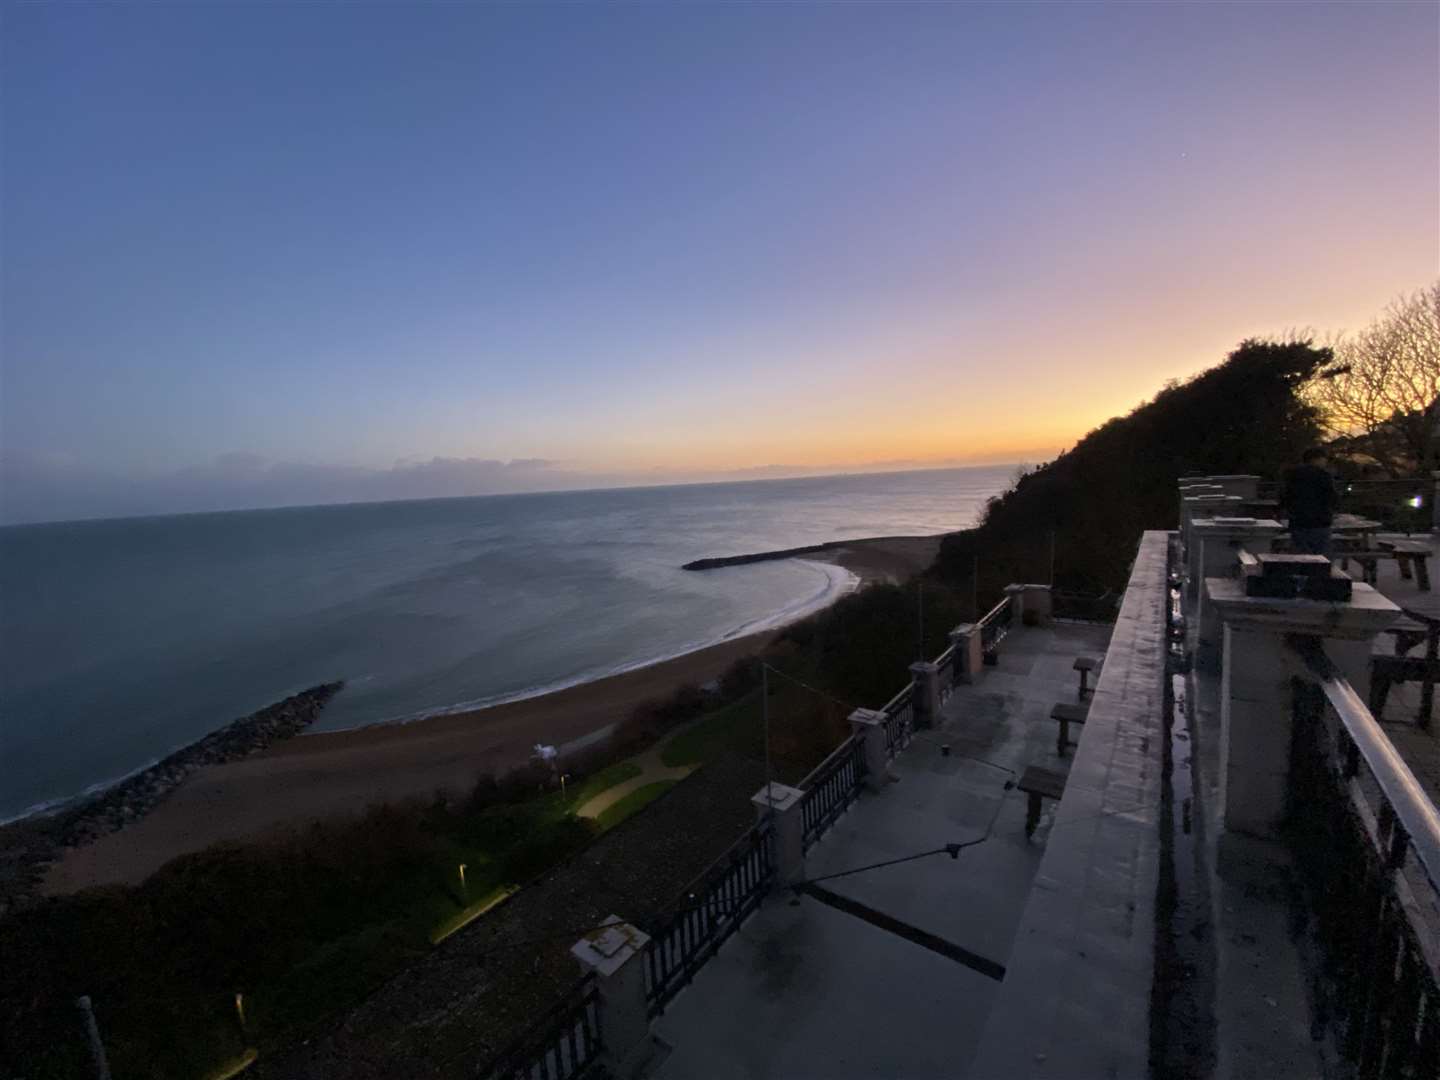 The sun sets on another day in Folkestone - the terror of the night is about to begin